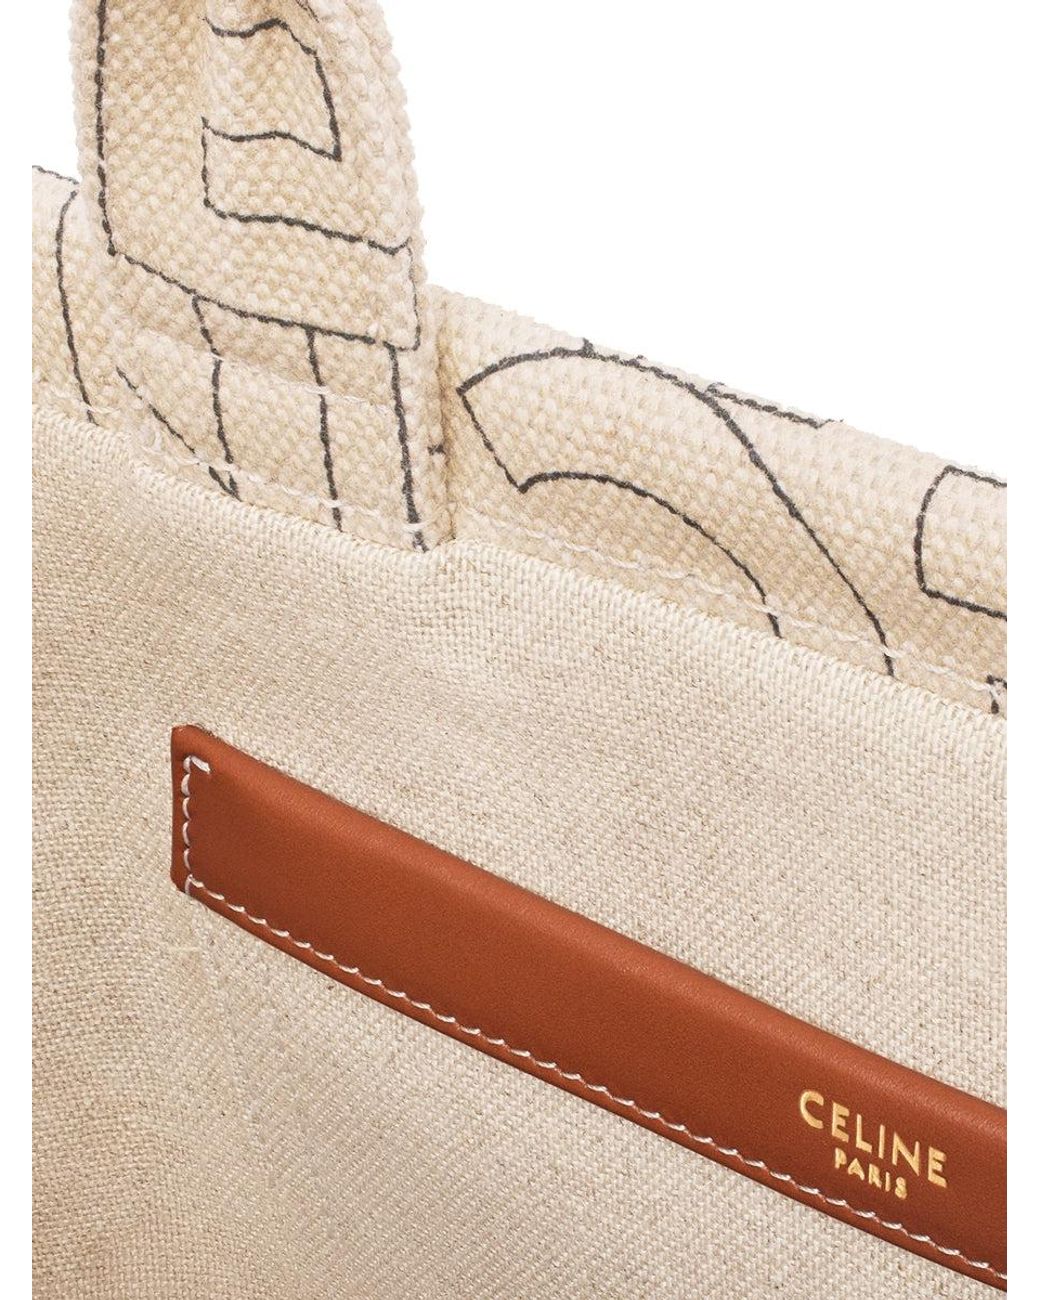 Celine Horizontal Cabas Bag In Textile With Logo Print in Natural